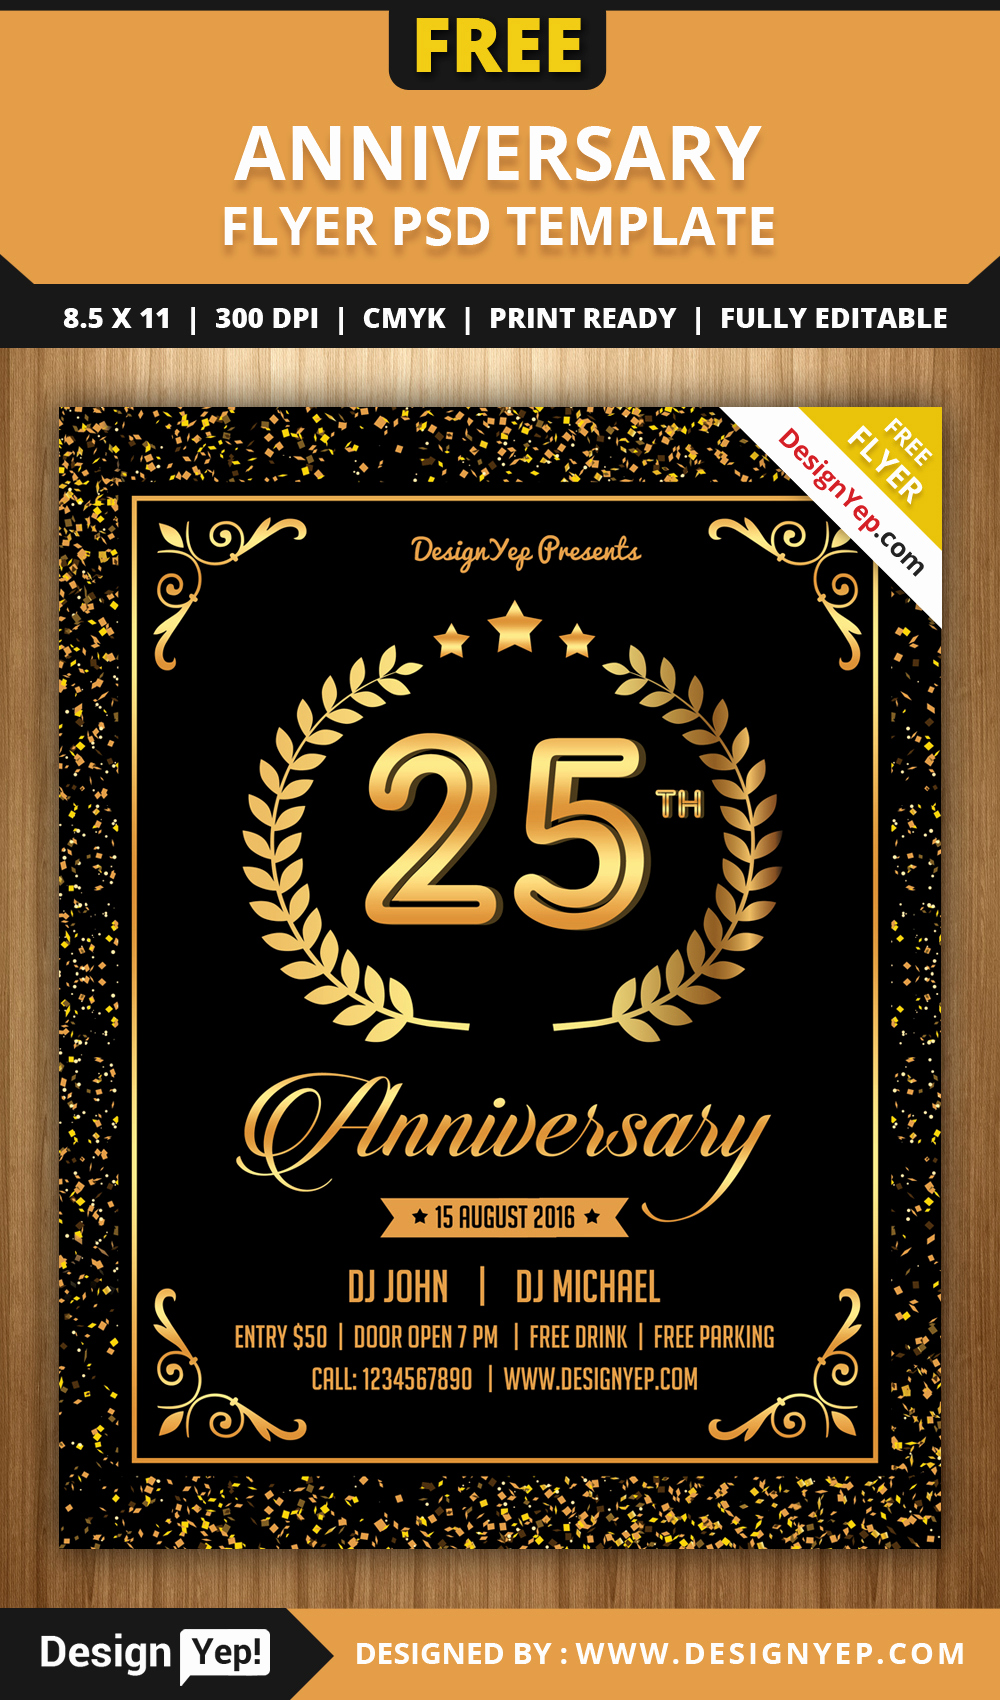 Free Download Flyer Templates Luxury Free Anniversary Party Flyer Psd Template Designyep